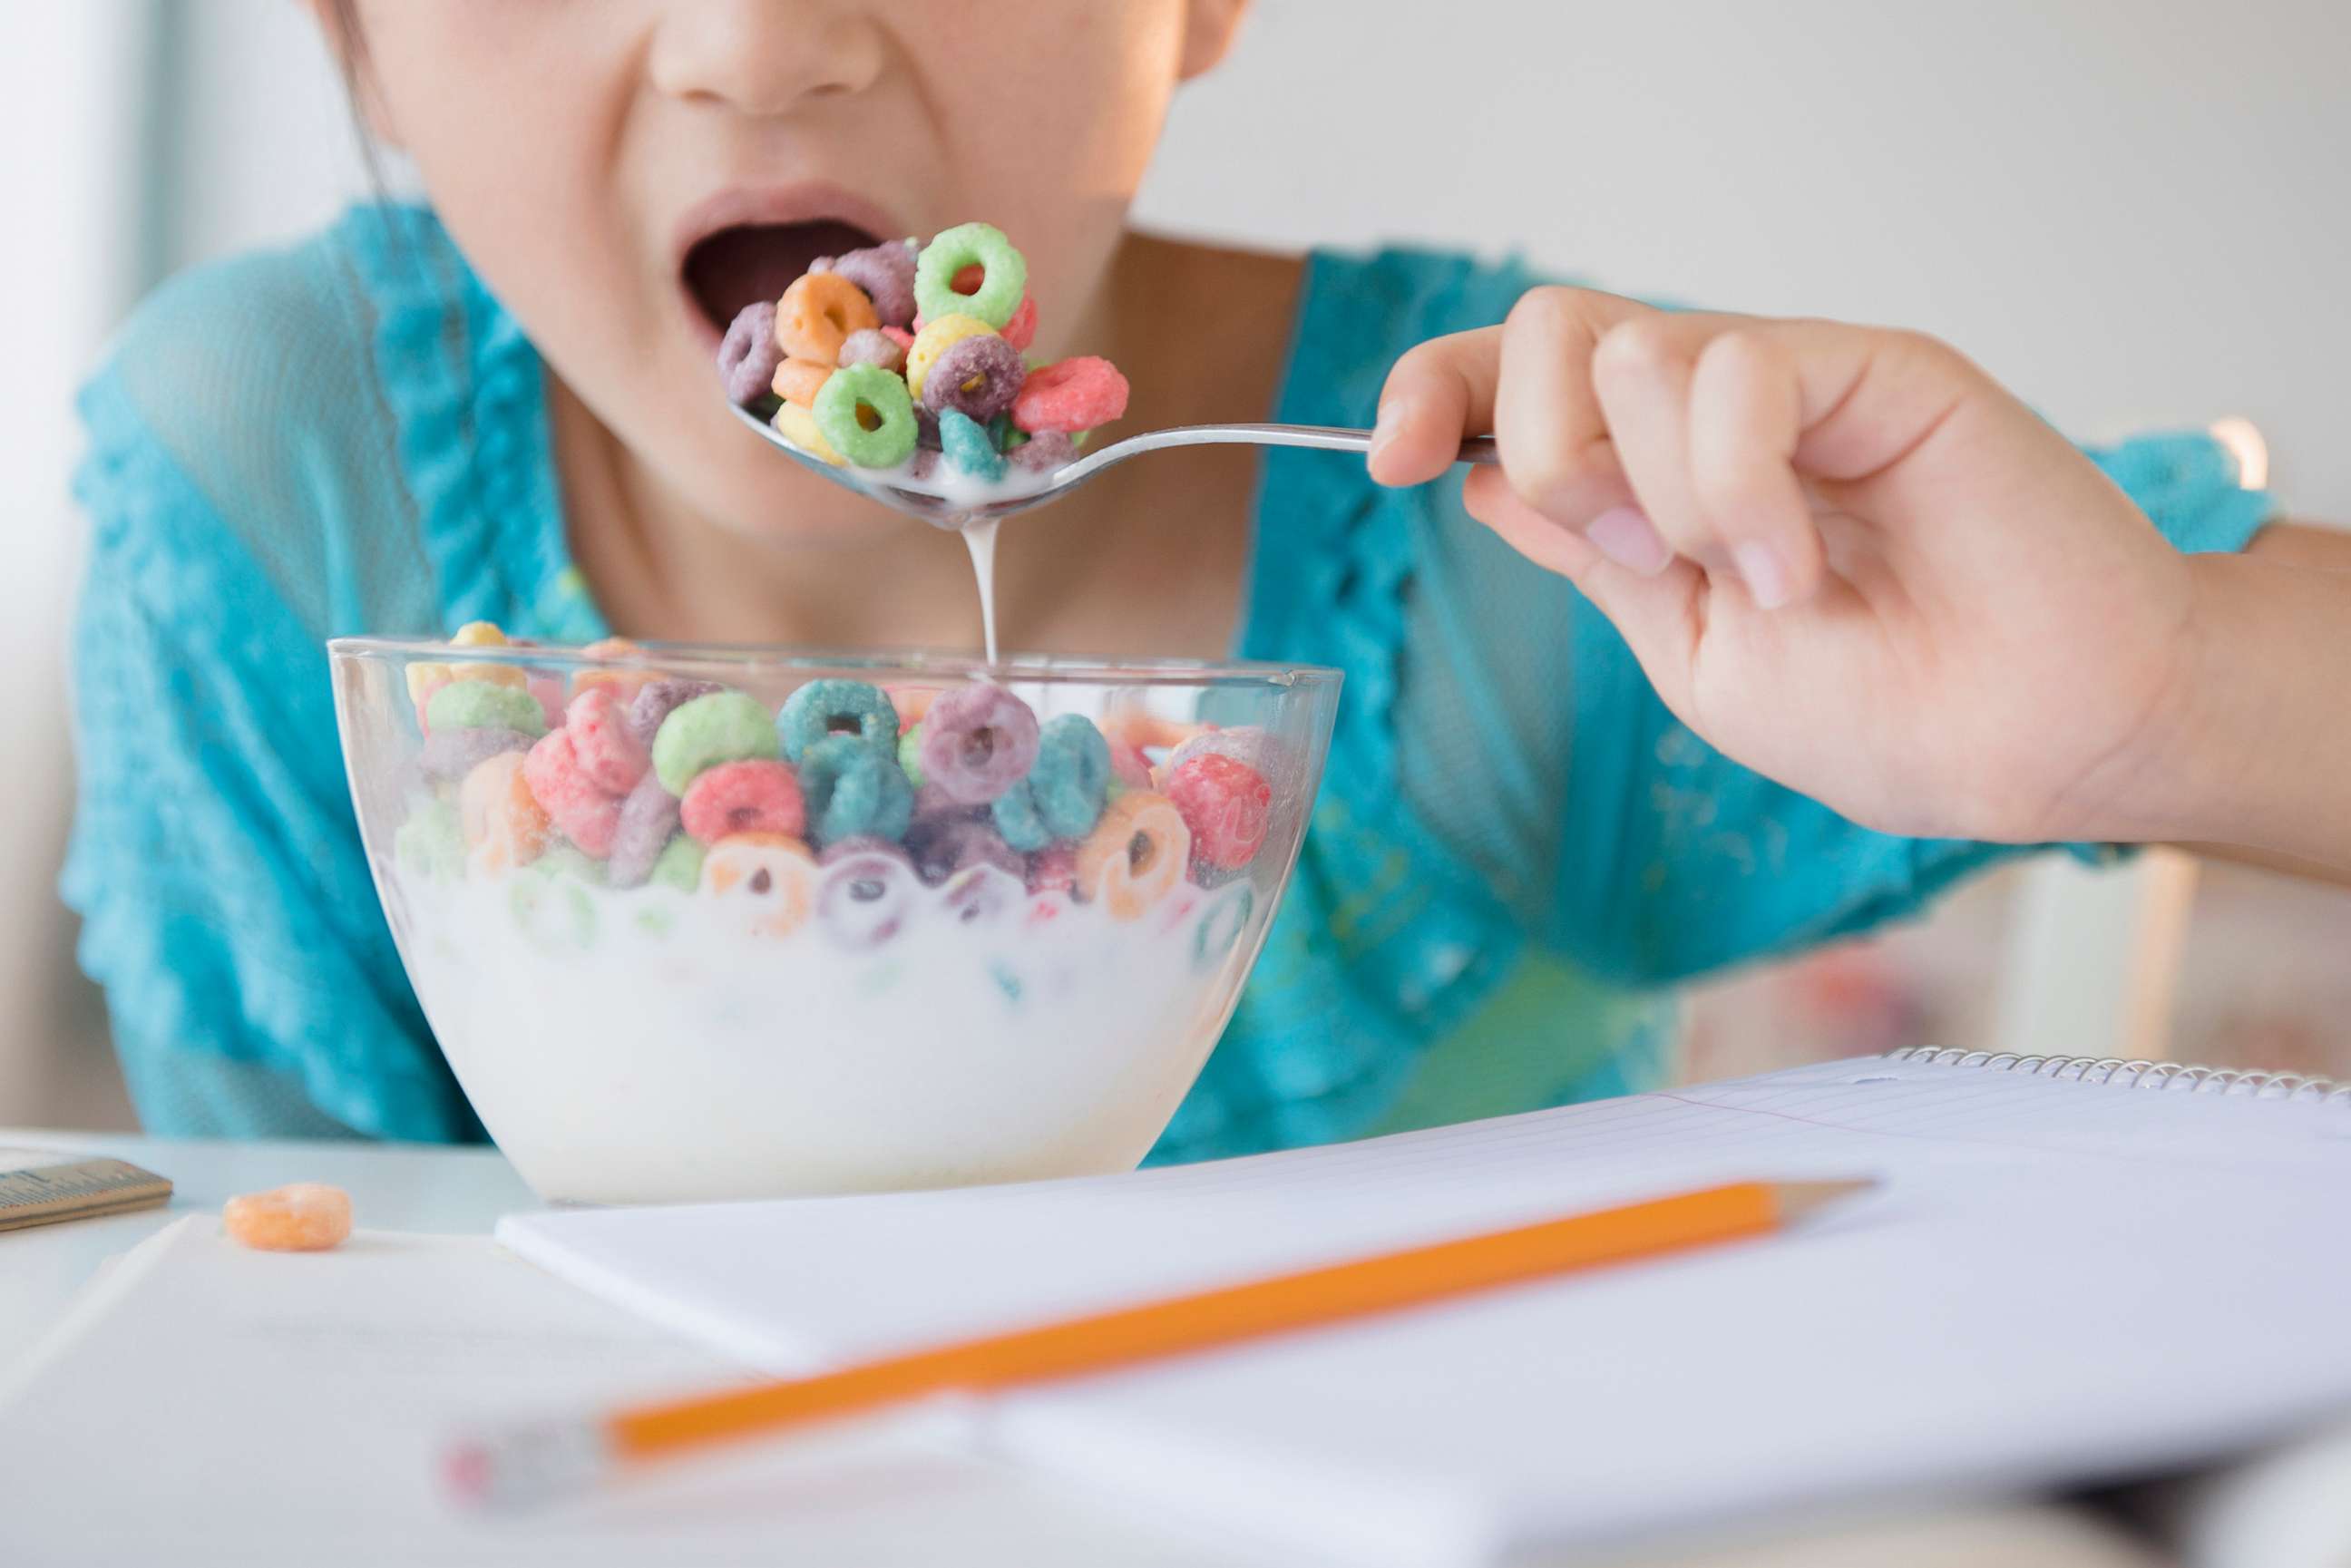 PHOTO: Stock photo of girl eating a bowl of cereal.